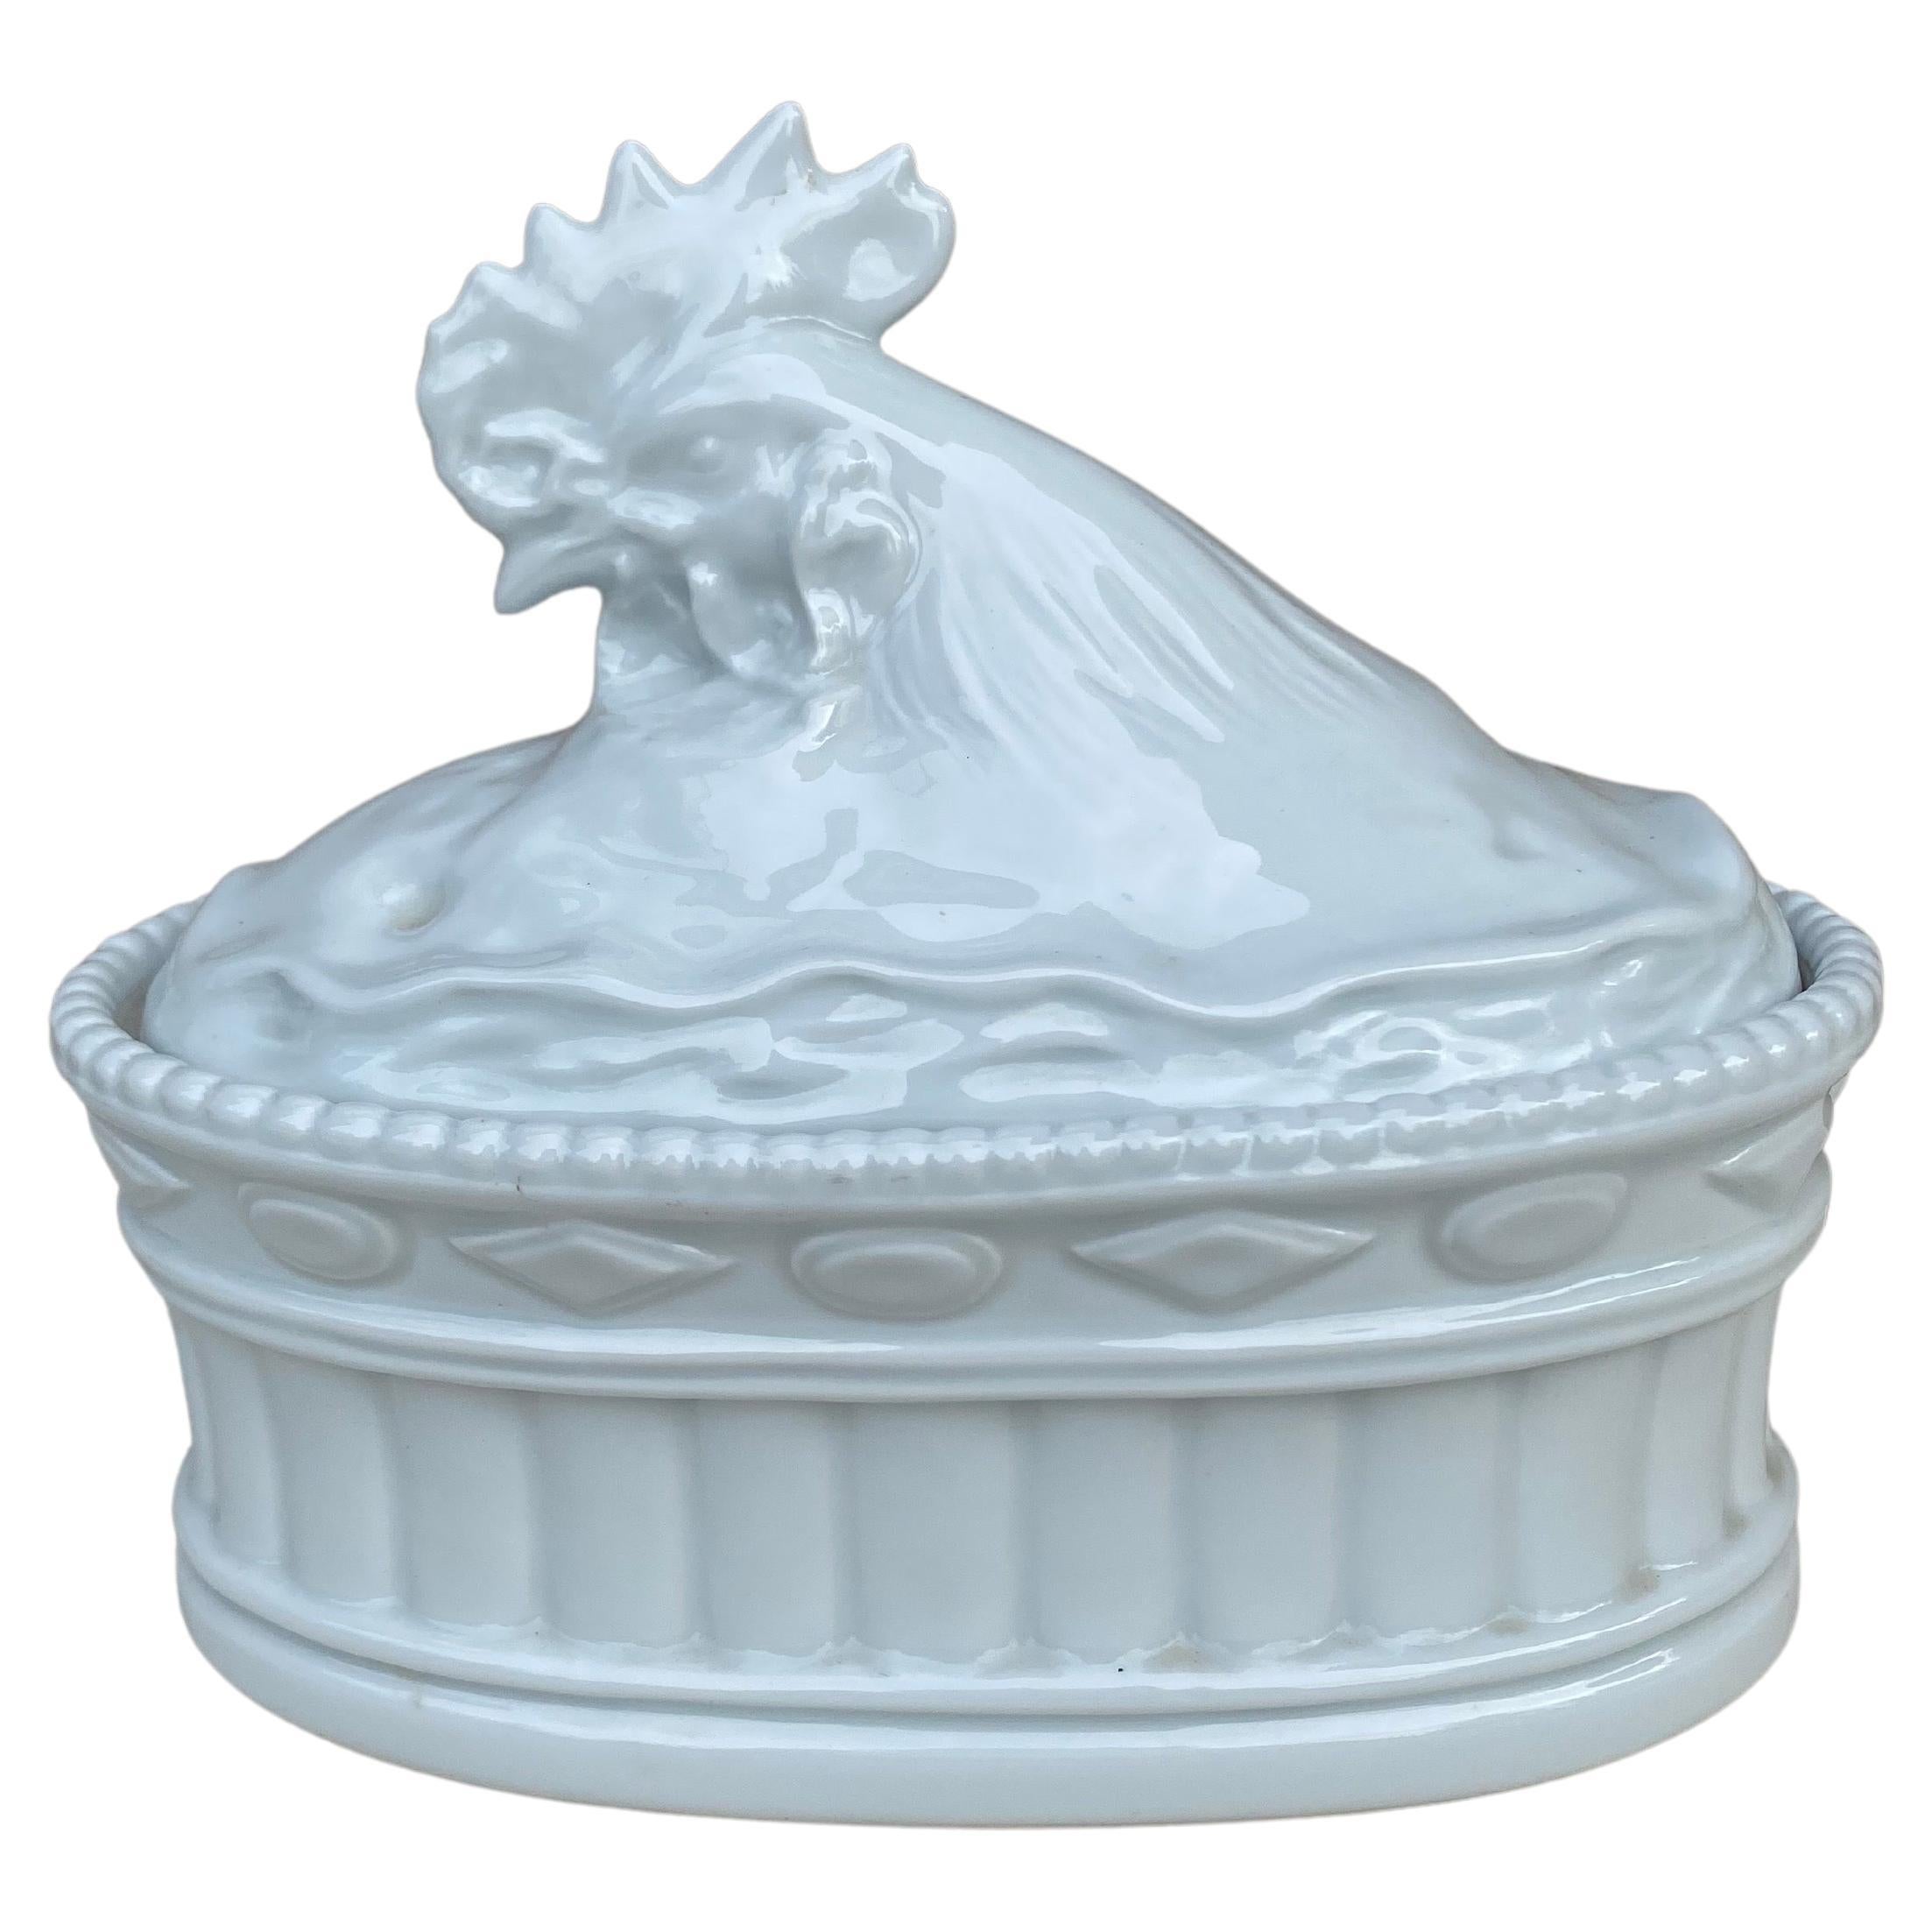 French Trompe L'oeil White Porcelain Rooster Pâté Tureen For Sale